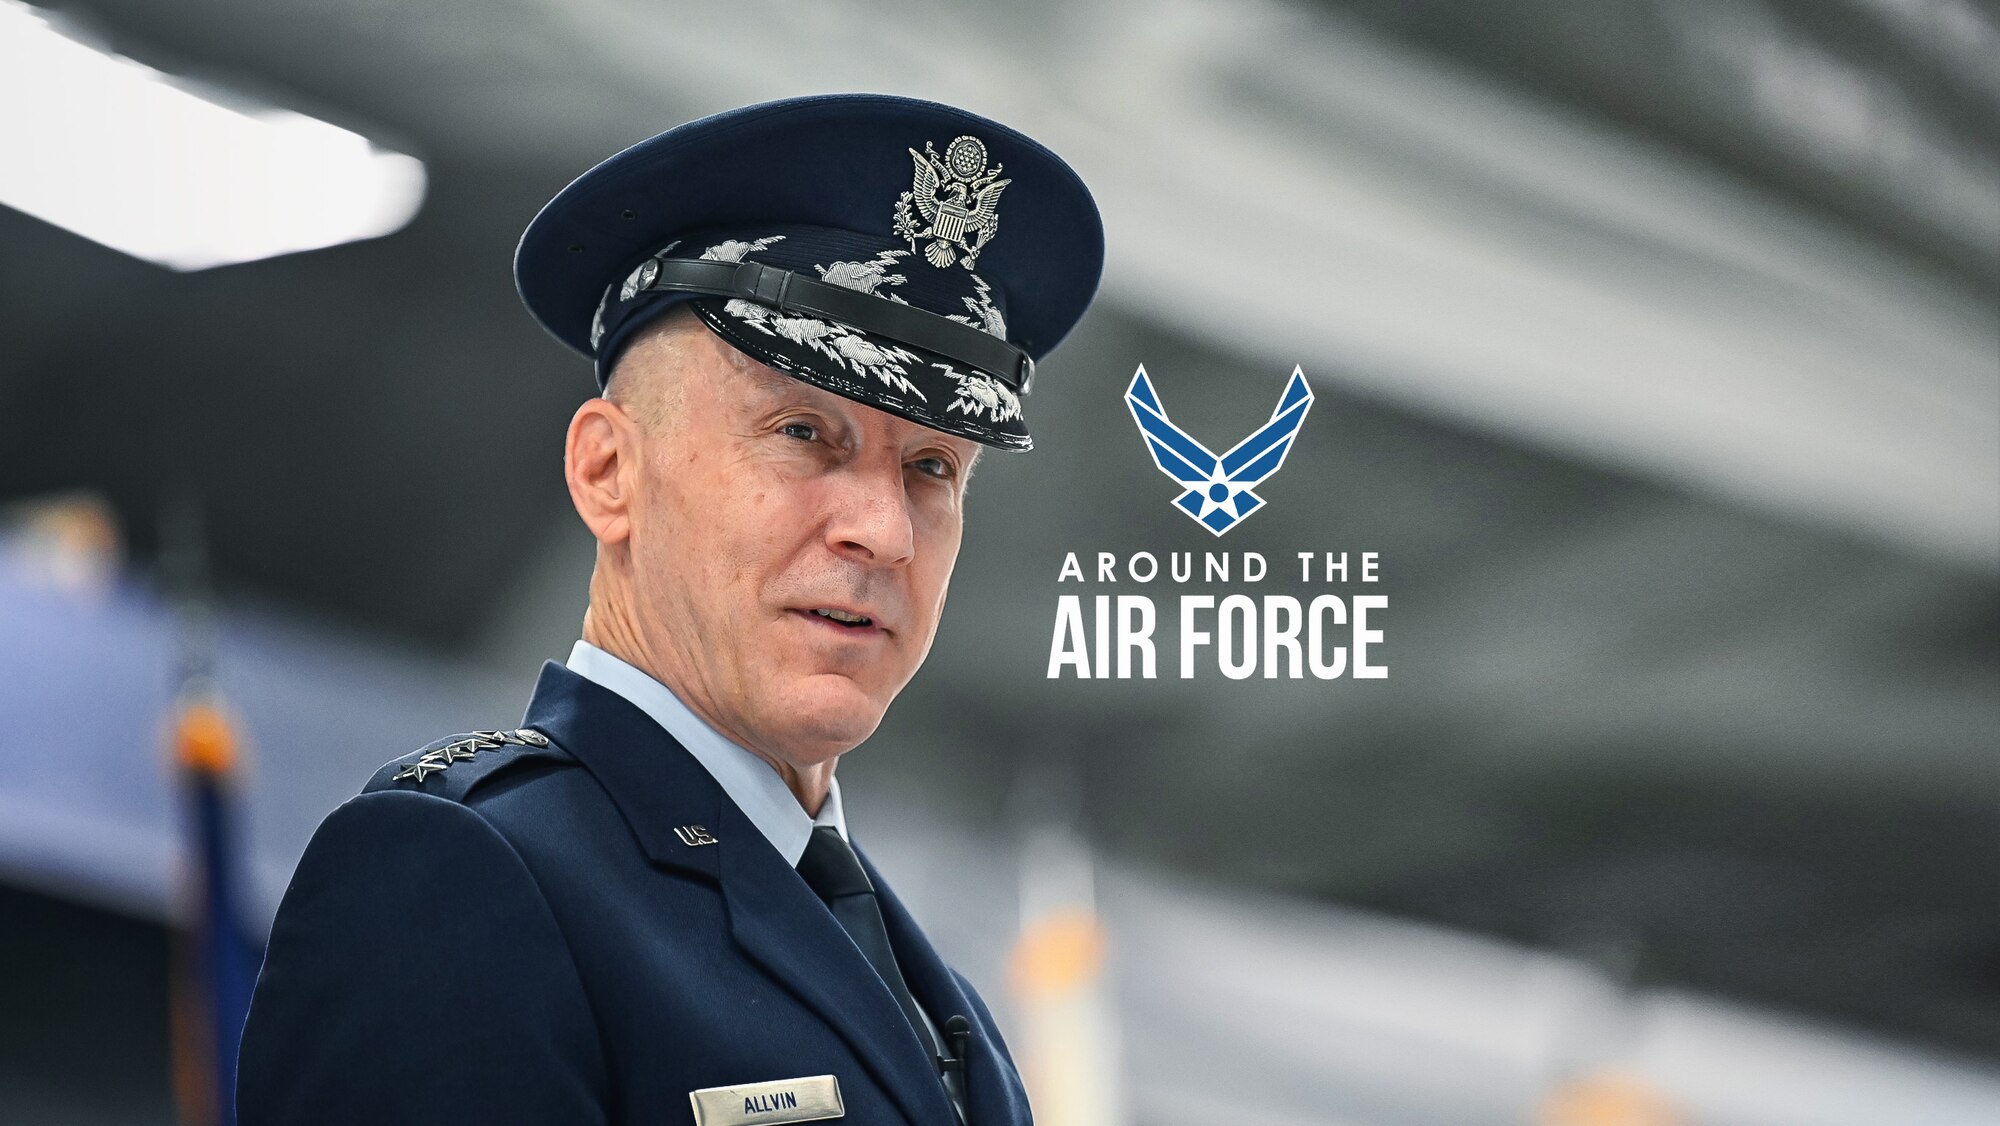 In this week’s look around the Air Force, the new Chief of Staff, Gen. David W. Allvin is welcomed by the force, a new benefit aids spouse-owned small businesses, and a new app helps military families find short-term childcare. (U.S. Air Force graphic by Travis Burcham)